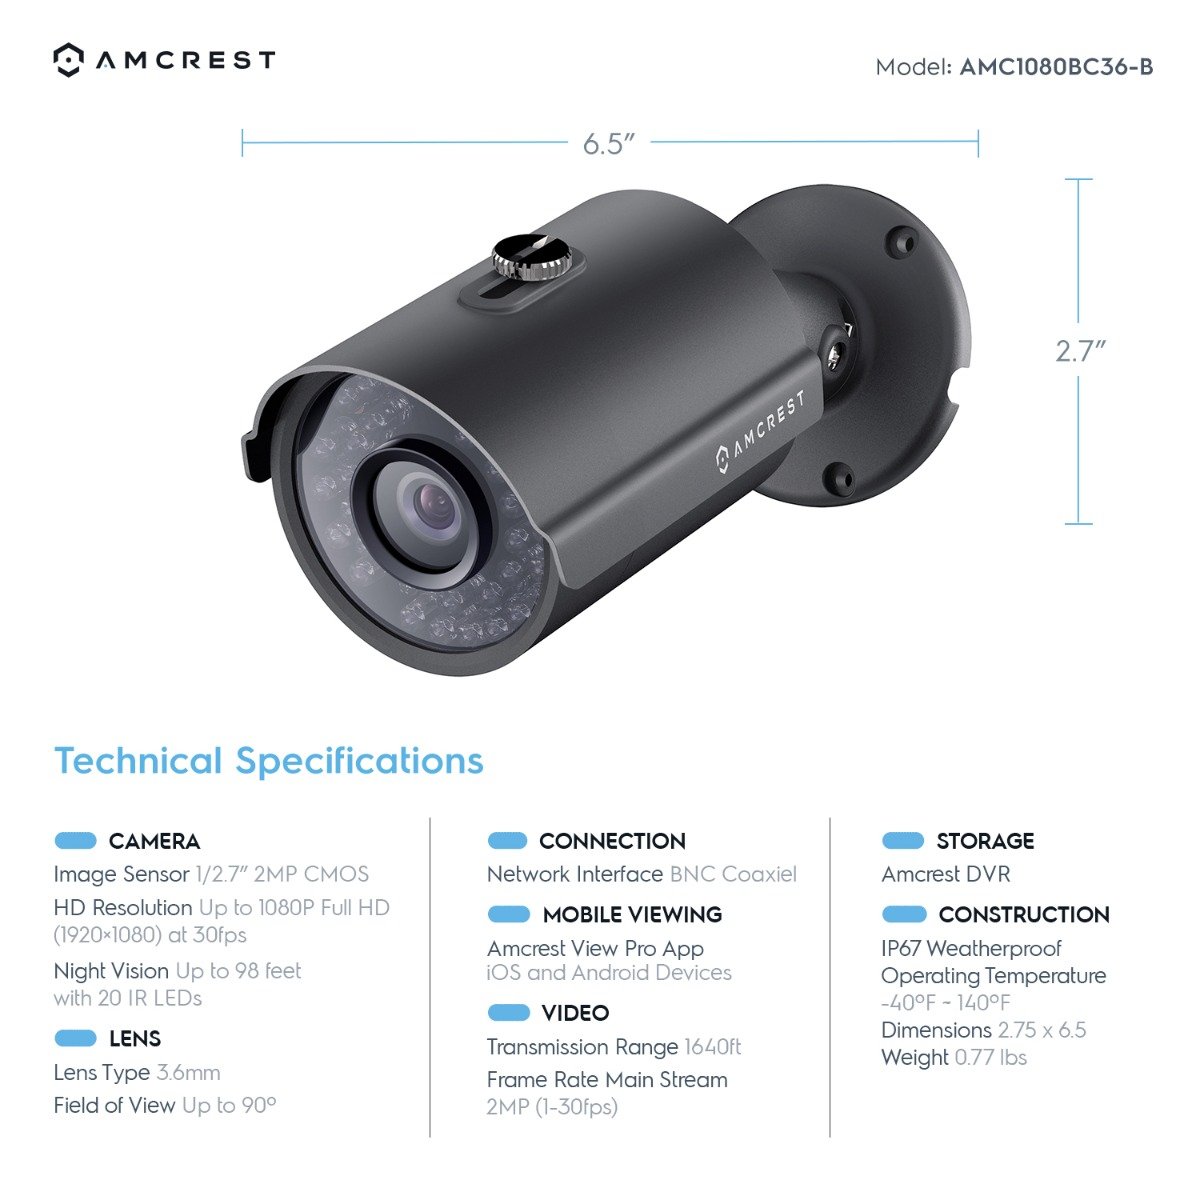 Amcrest ACD-830B 1080P Car Camera & DVR with Nightvision, Motion